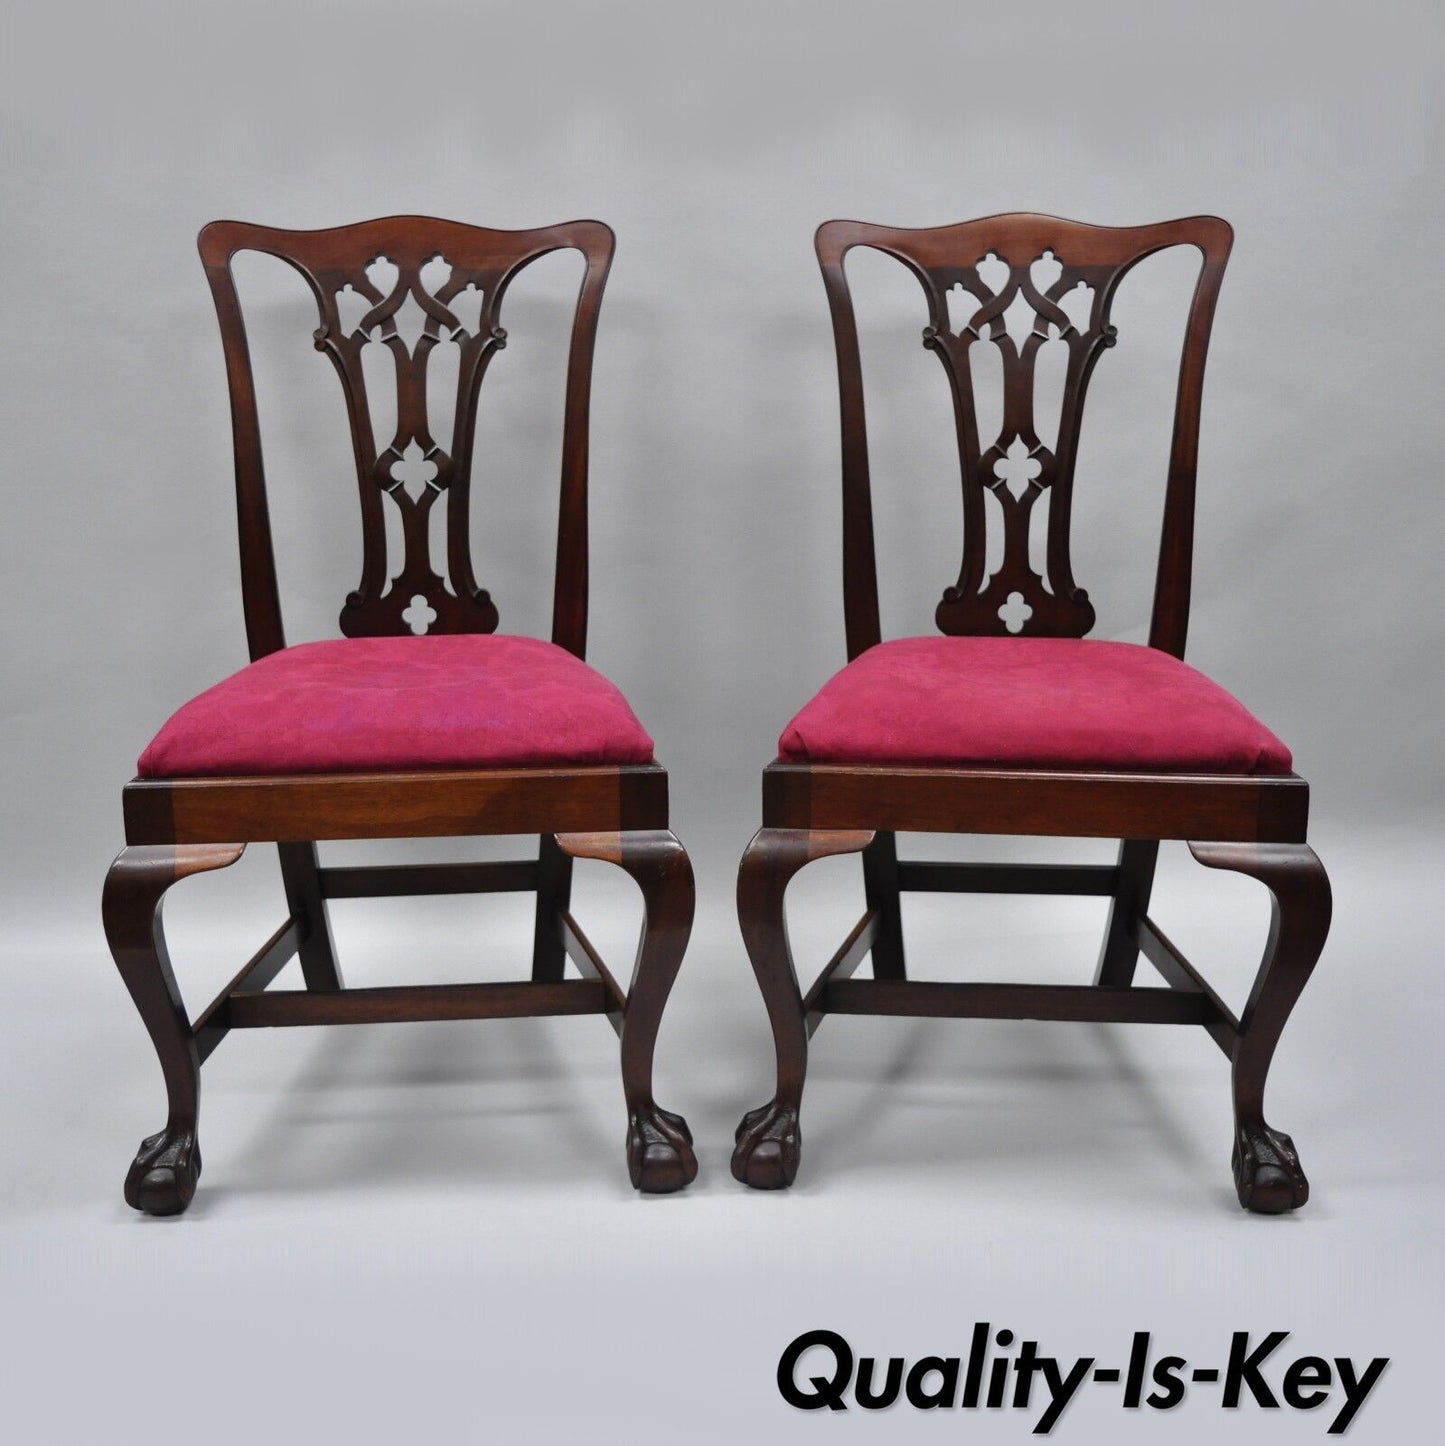 T. Robinson & Sons Makers Antique Solid Mahogany Chippendale Style Side Chairs